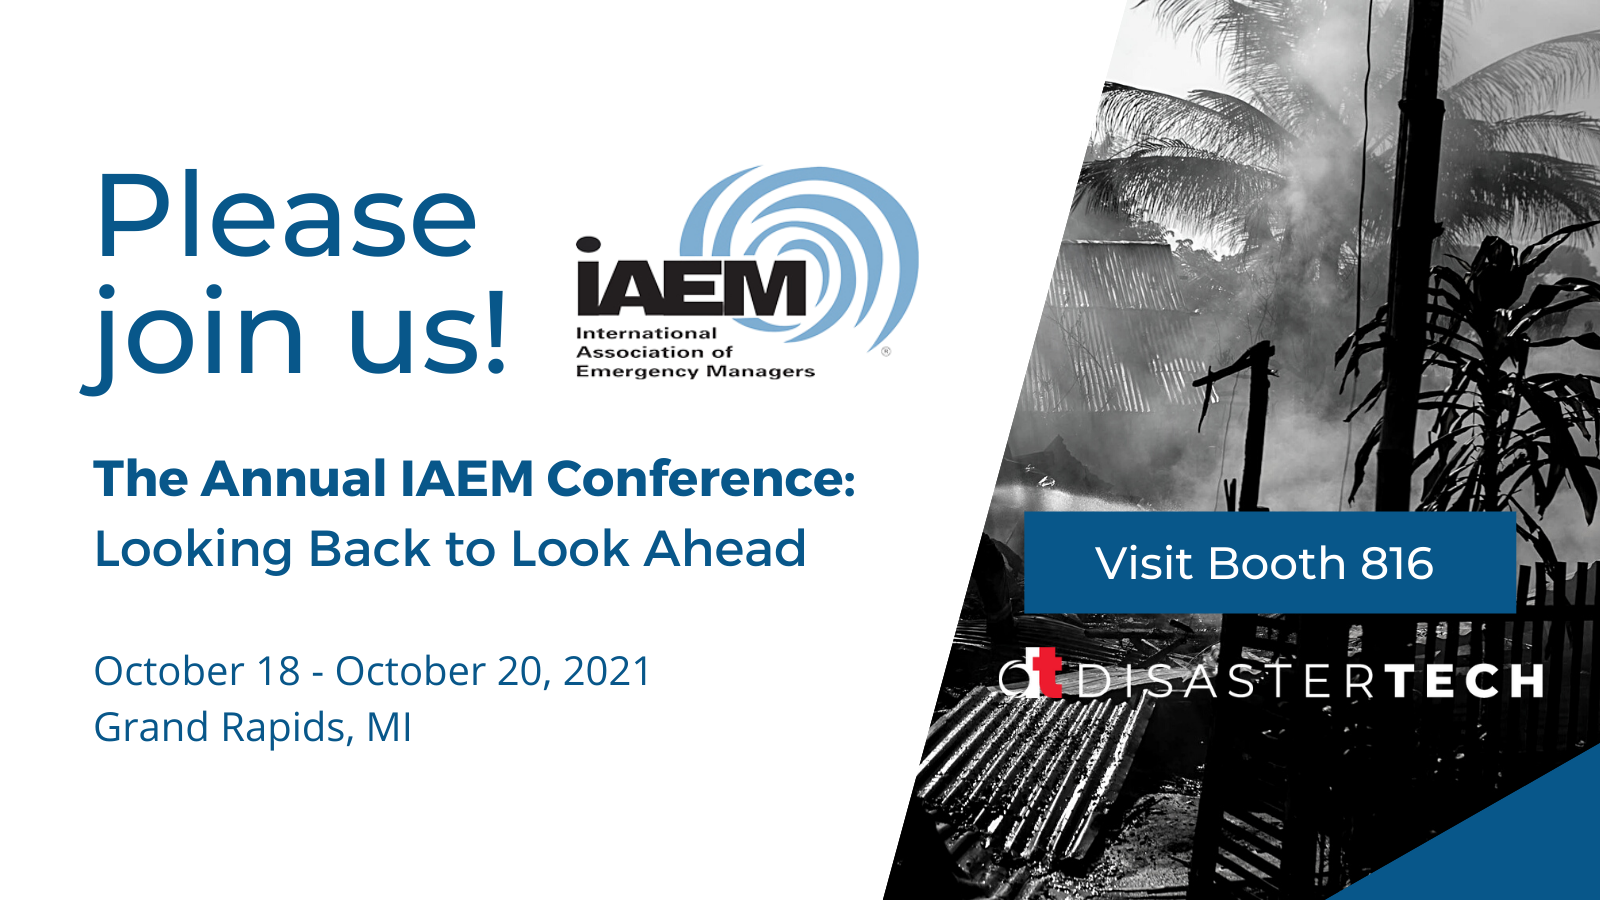 Join Us for the IAEM 2021 Conference in Grand Rapids, MI